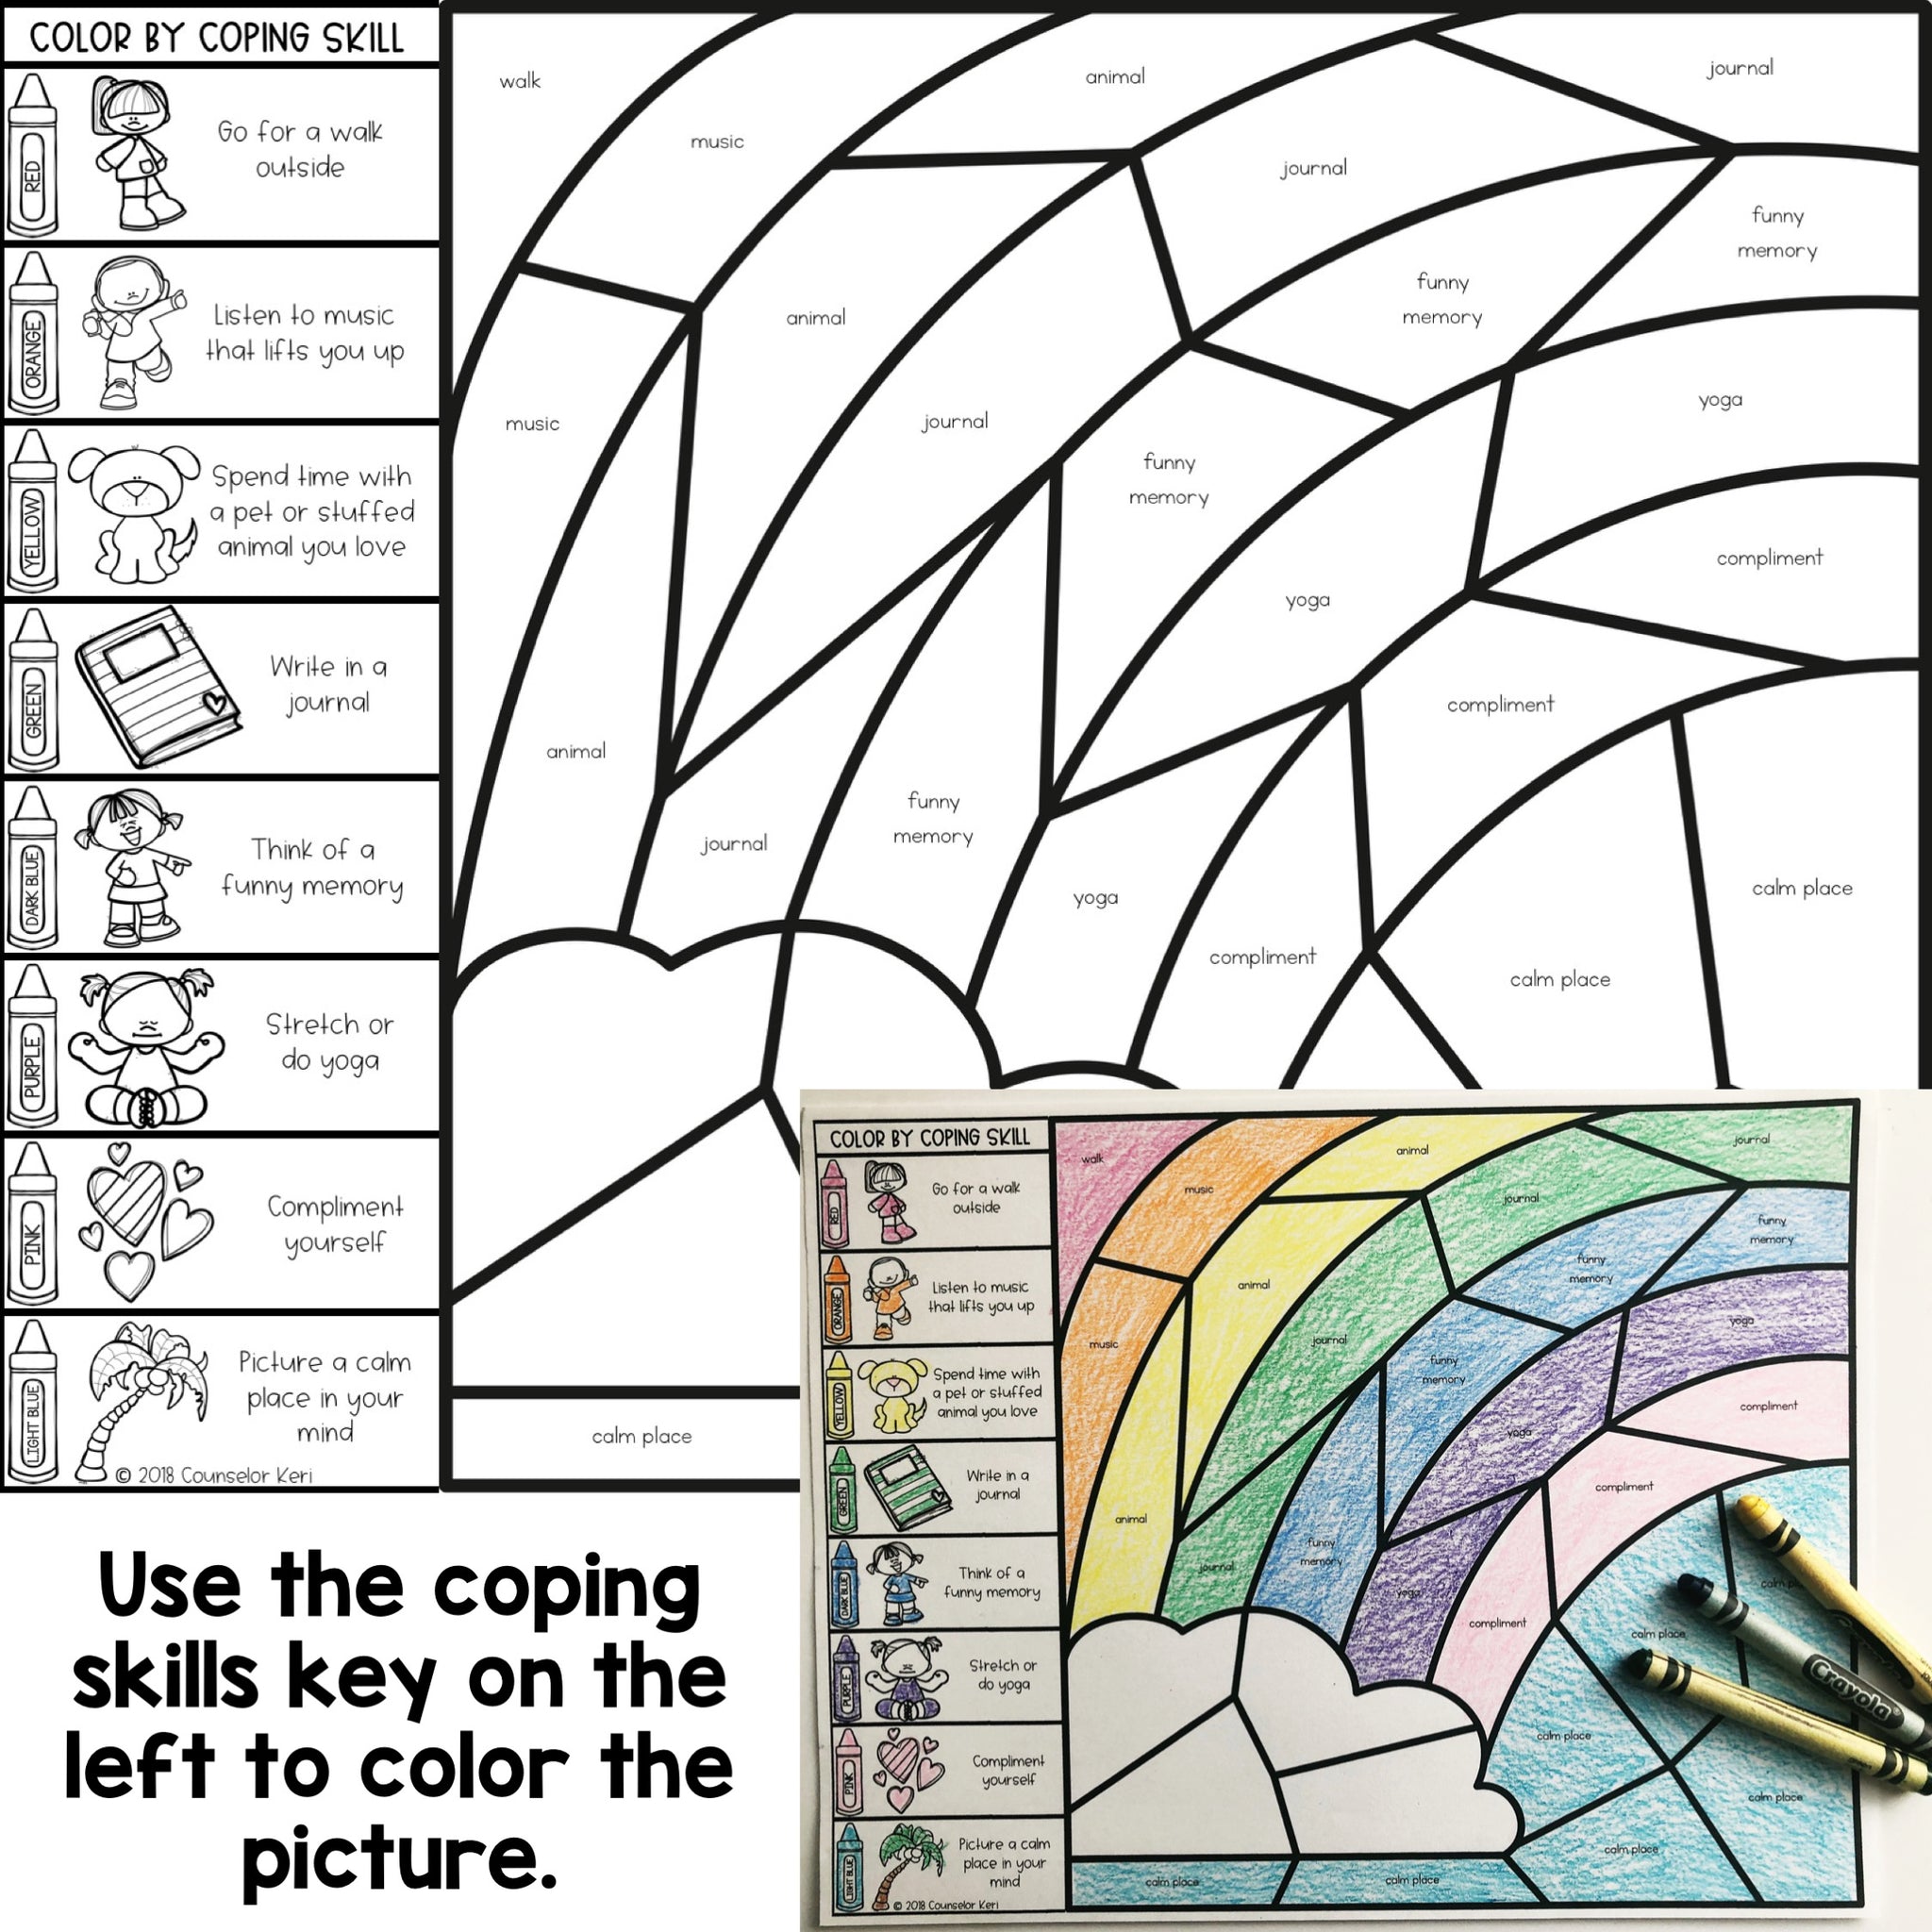 Color By Coping Skills Bundle: Coping Skills Activities – Counselor Keri